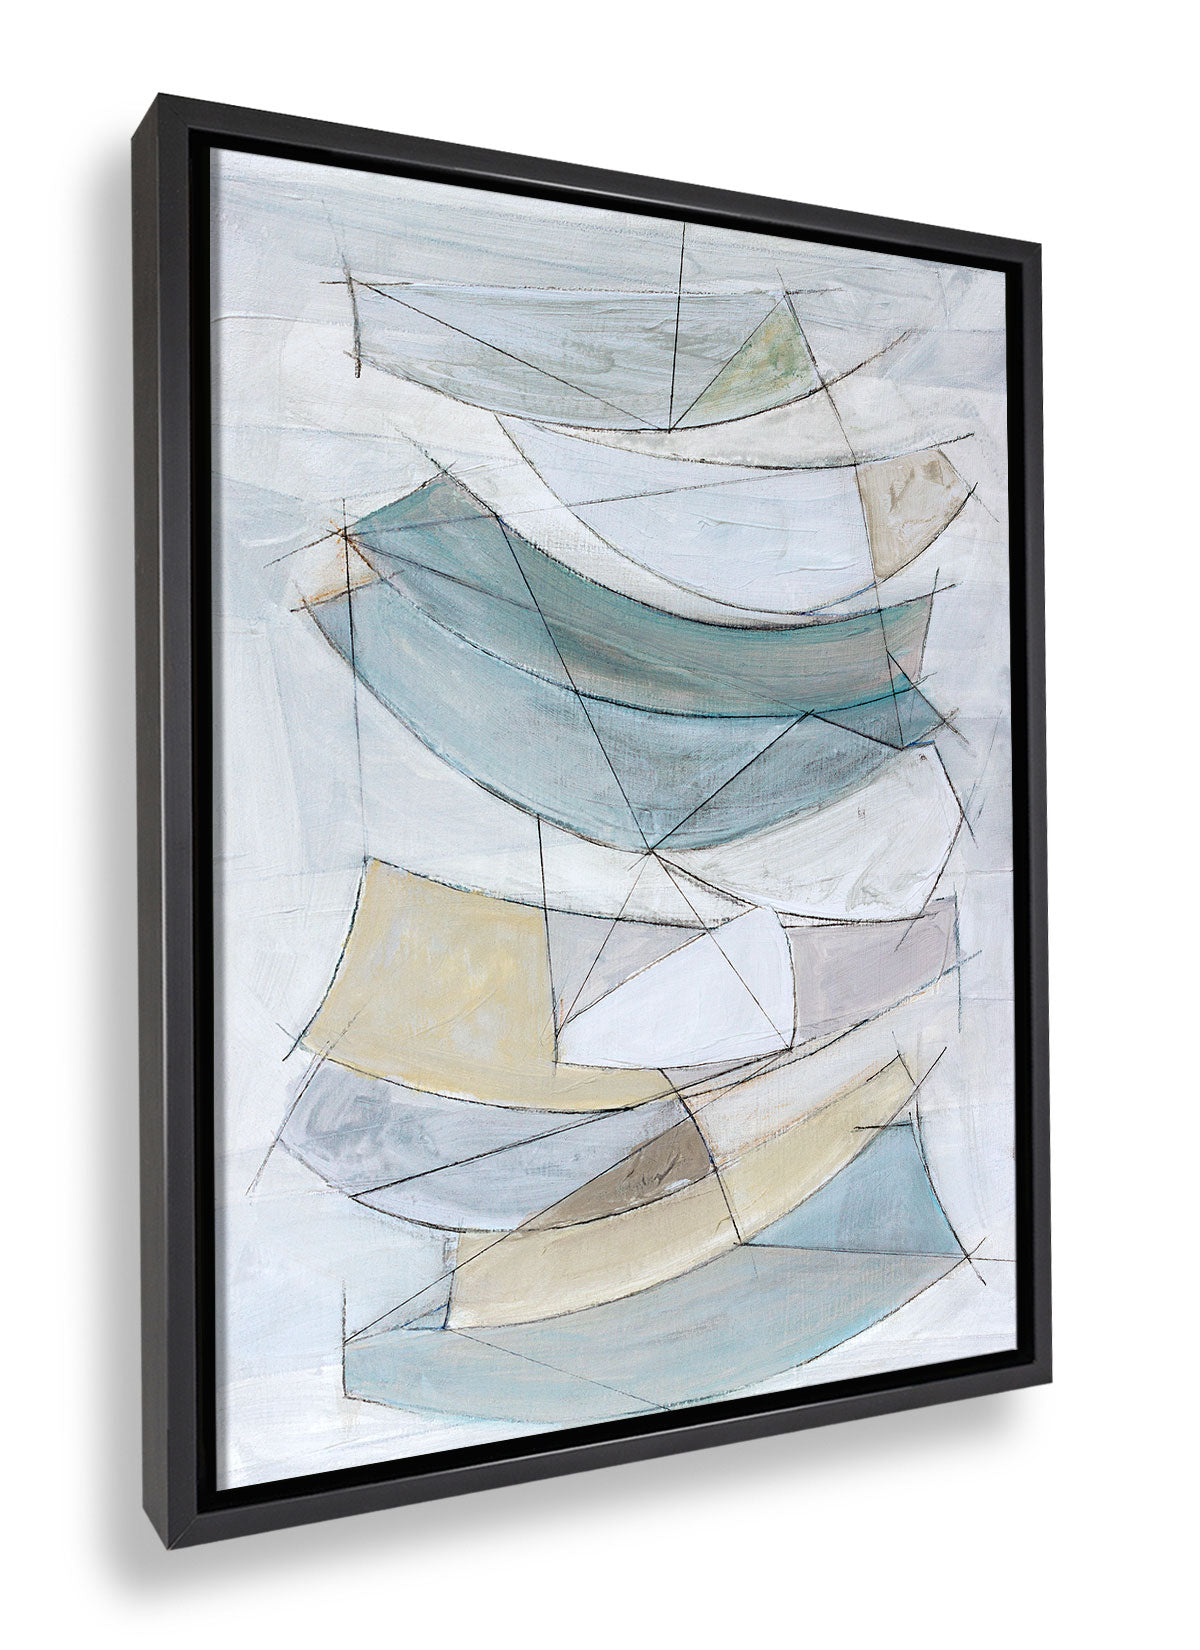 Trade Winds 3 by Rob Delamater - Art Print